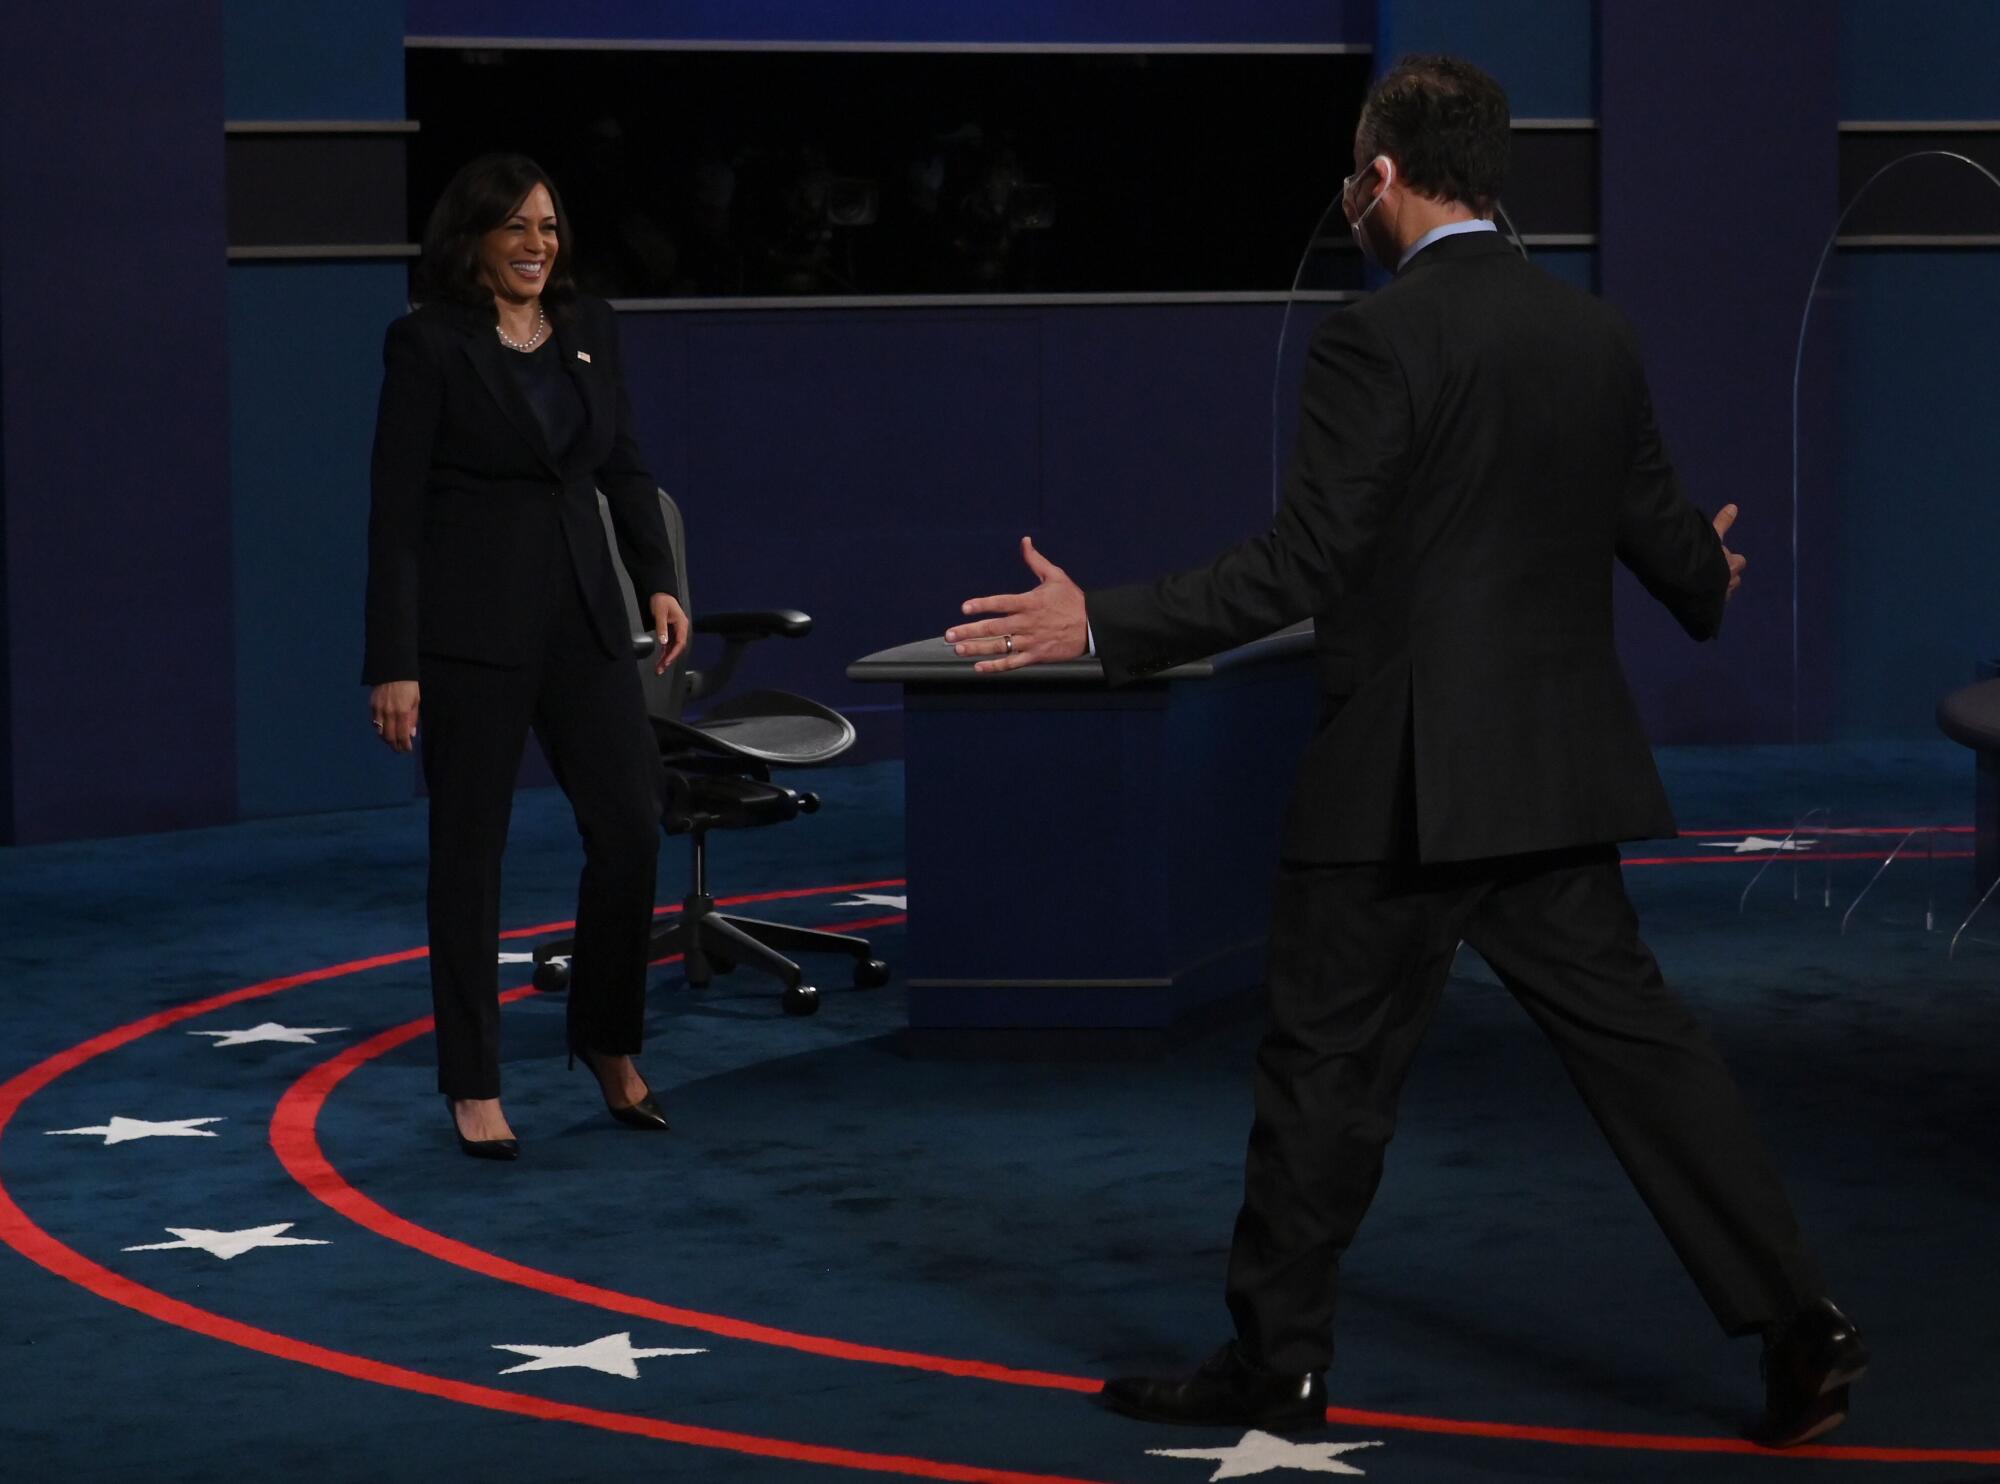 Kamala Harris smiles as her husband stretches his arms out for a hug on the debate stage